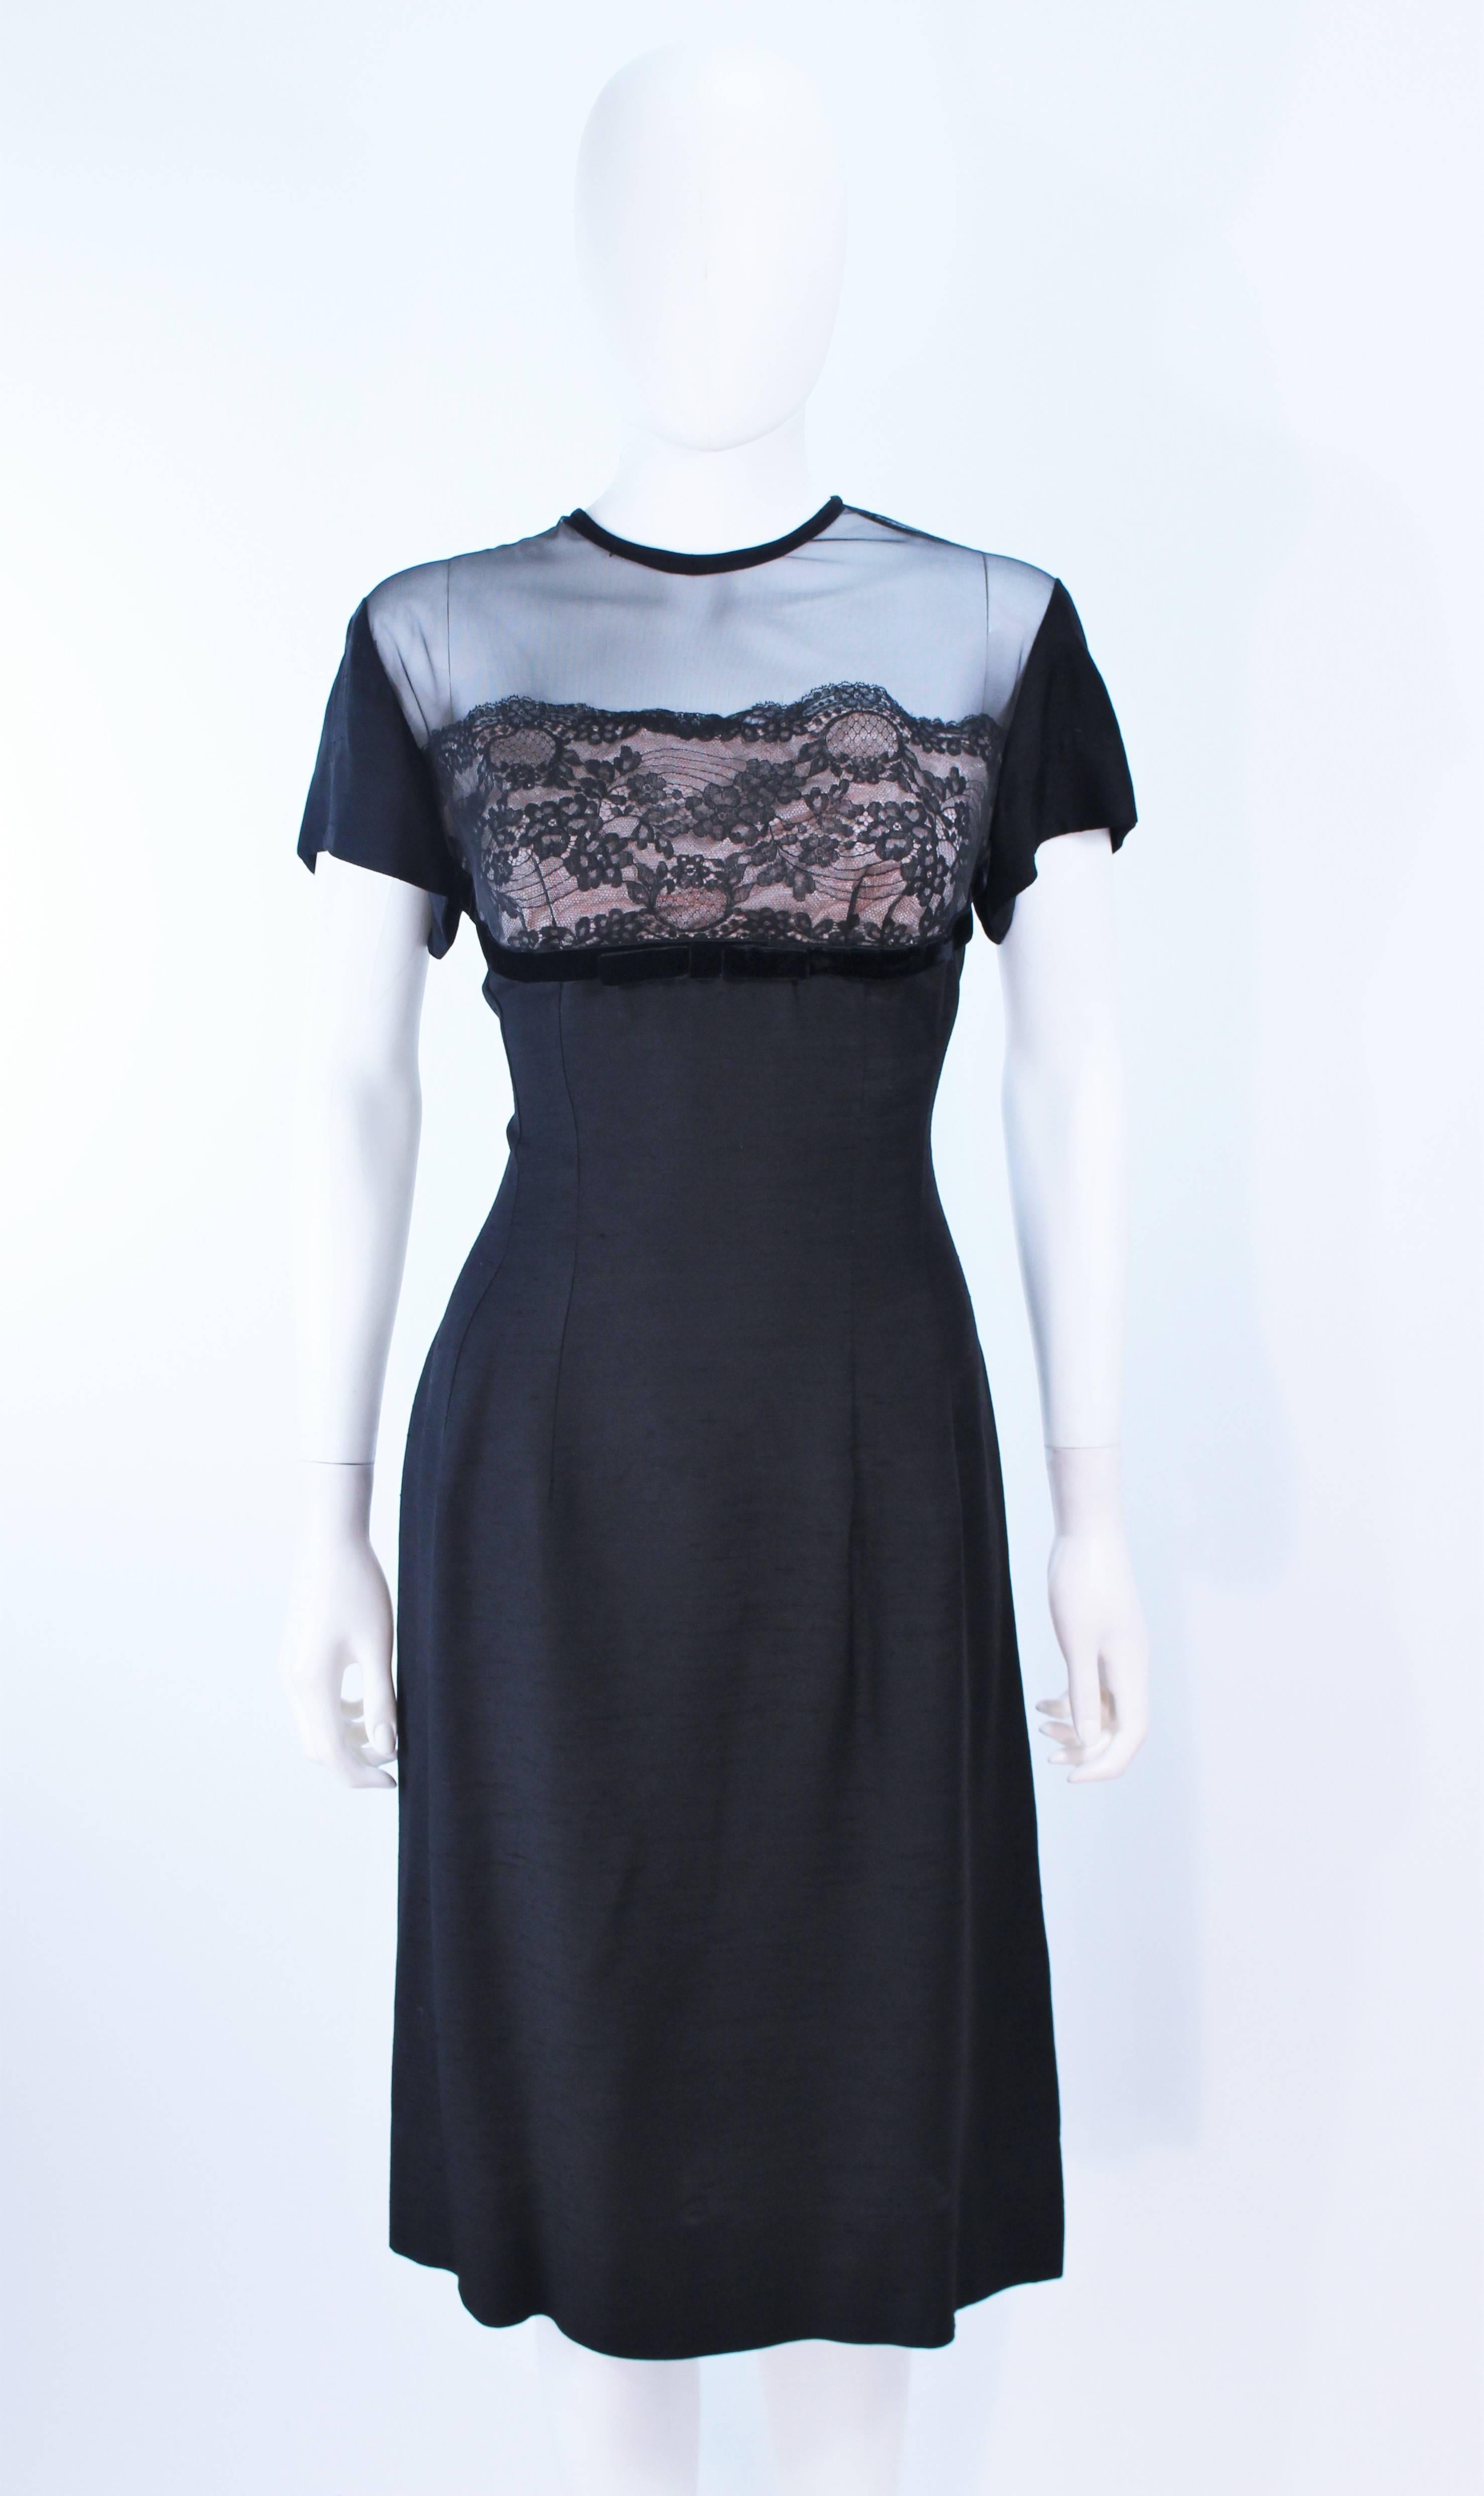 J. HARLAN Black Silk and Lace Cocktail Dress with Sheer Details Size 8 ...